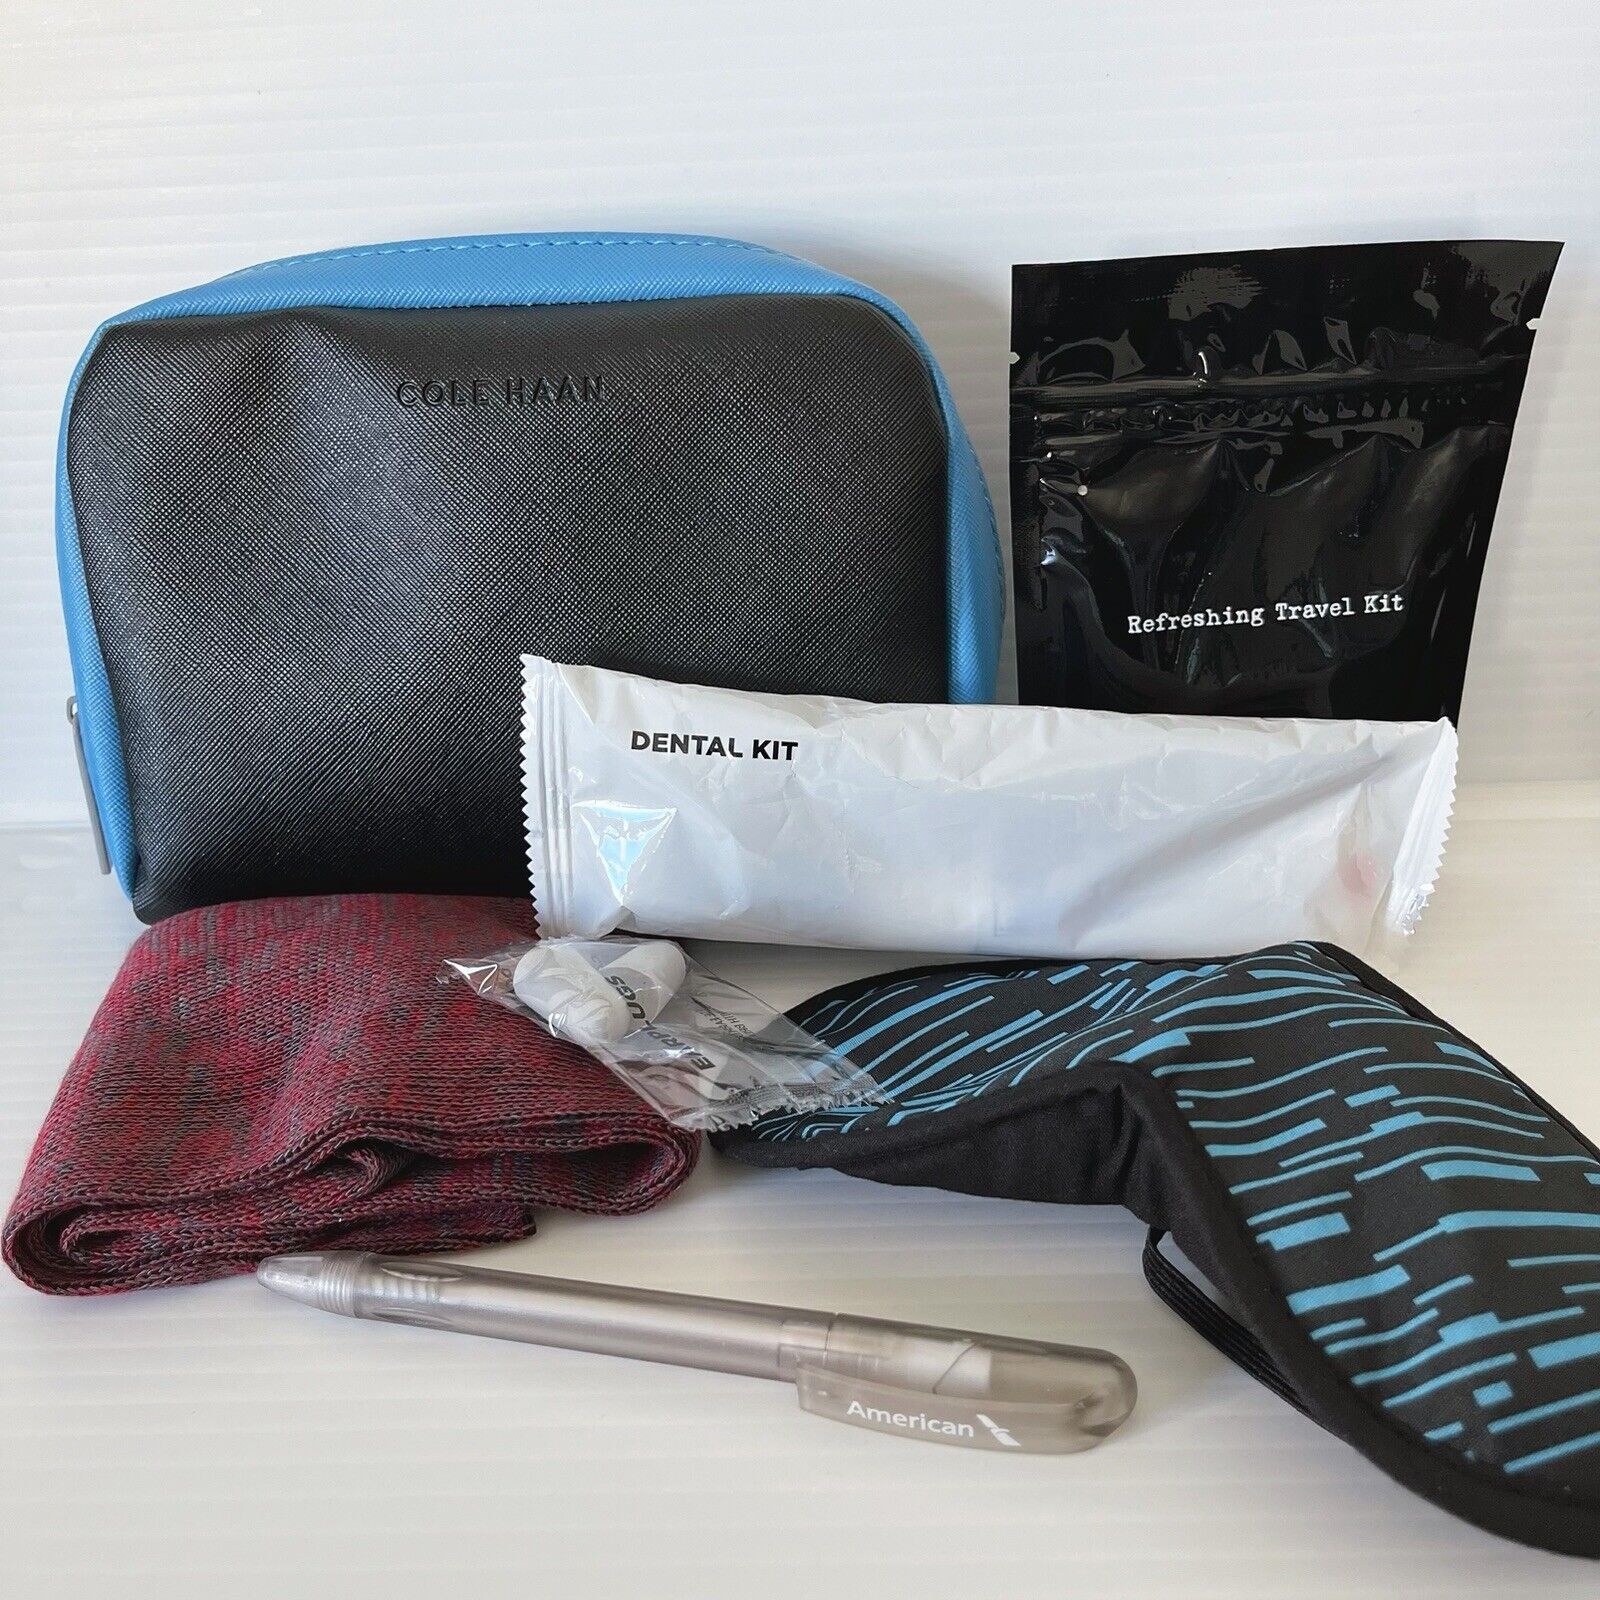 COLE HAAN AMERICAN AIRLINES amenity kit bag cosmetic travel holder - NEW